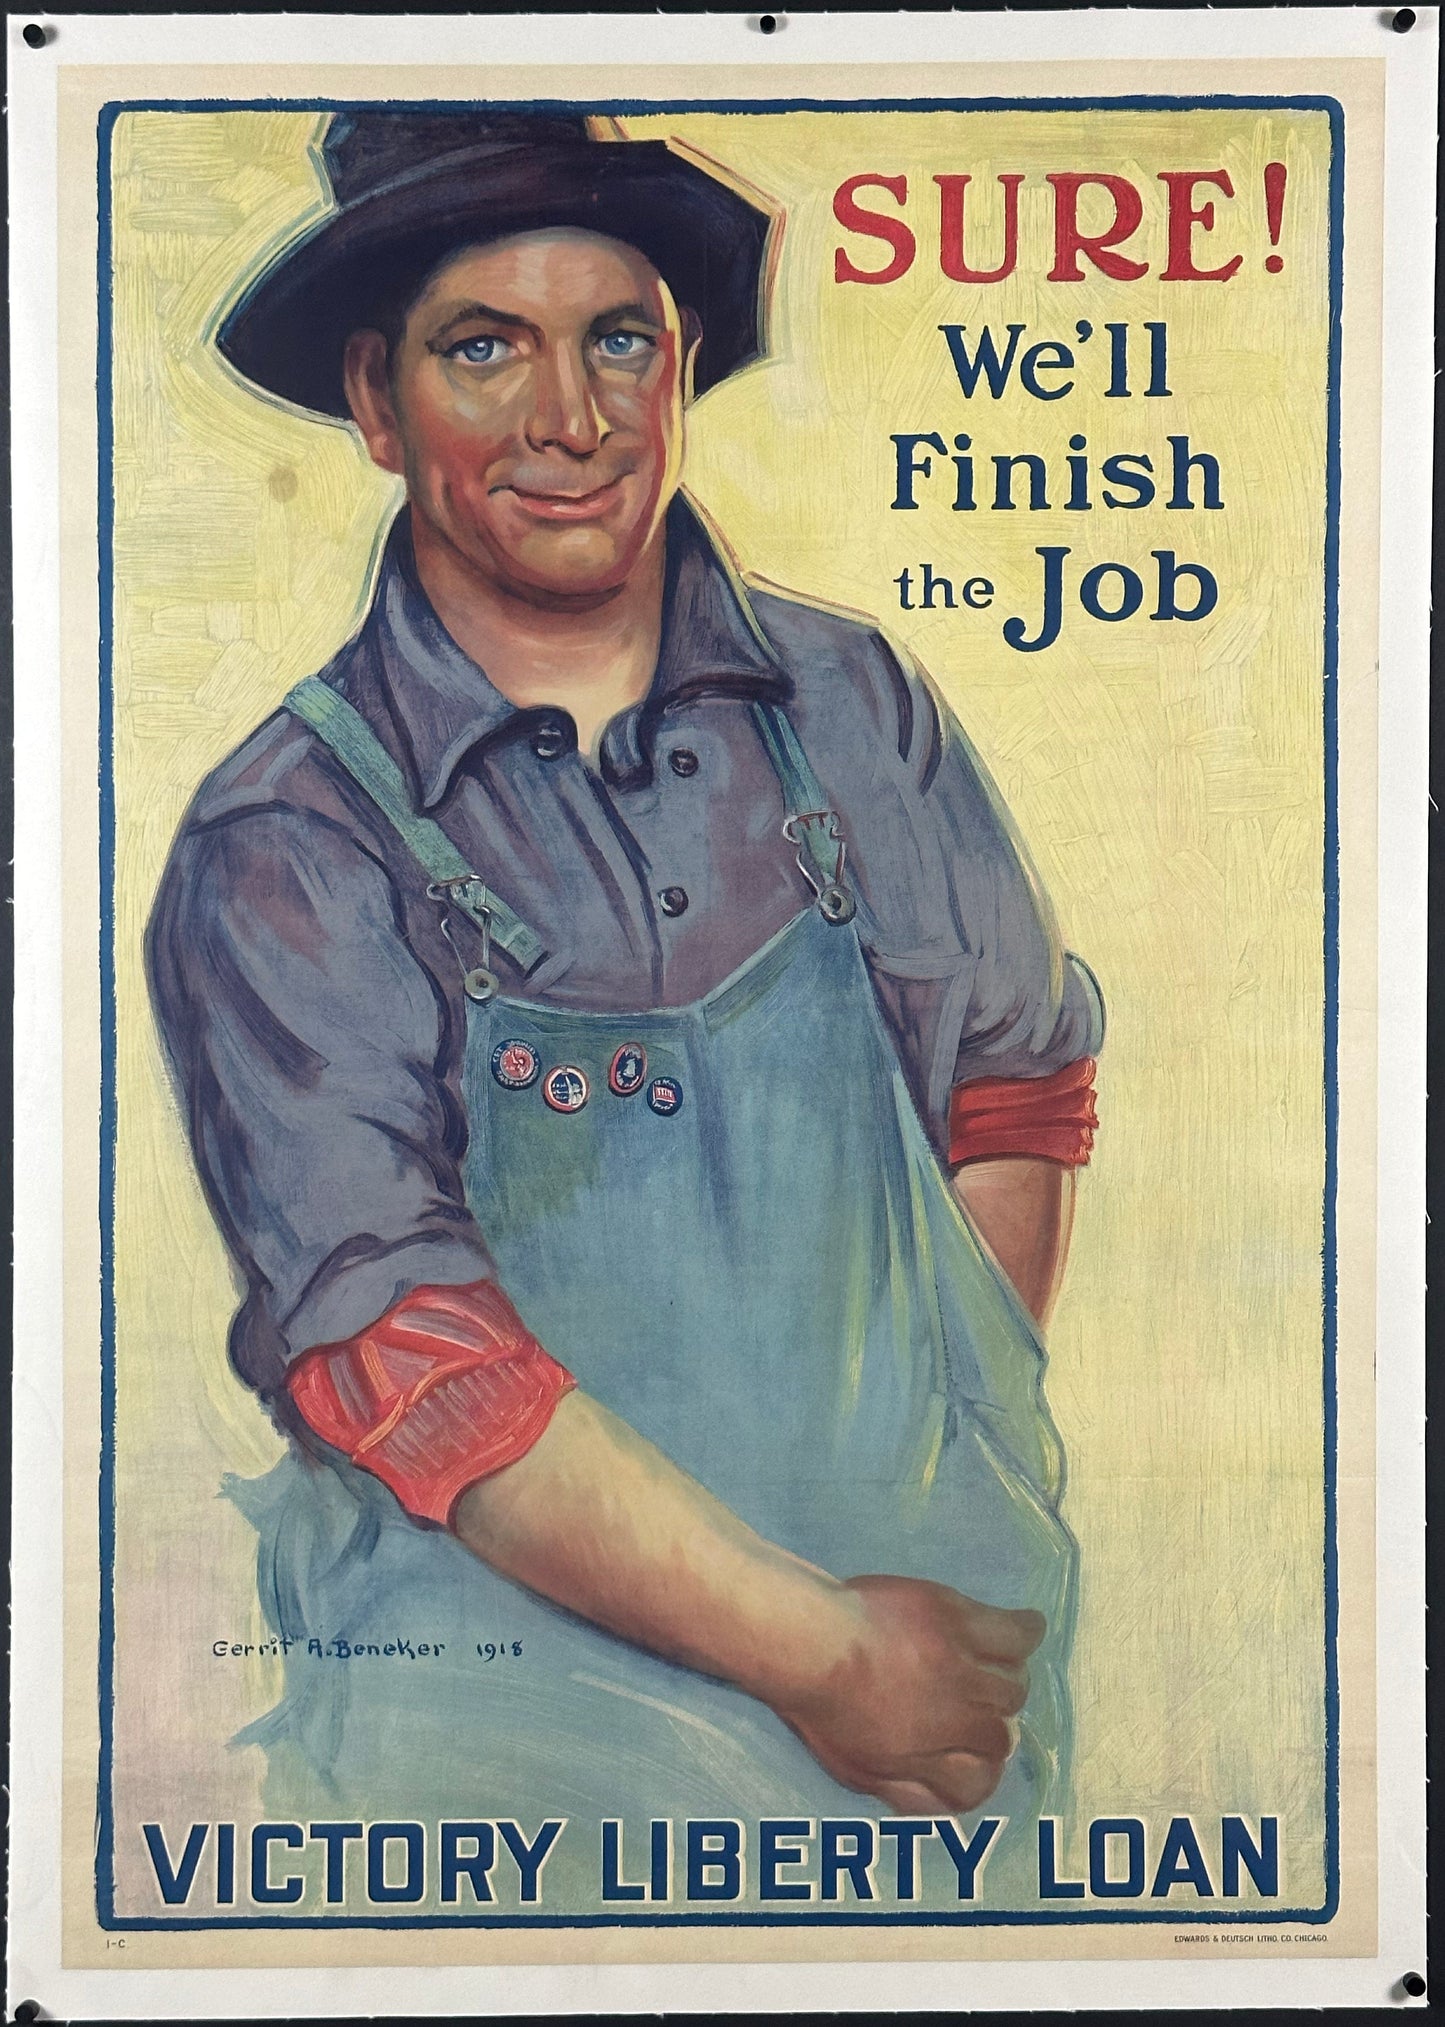 "Sure! We'll Finish The Job" War Bond WWI Home Front Poster by Gerrit A. Beneker (1918) - posterpalace.com